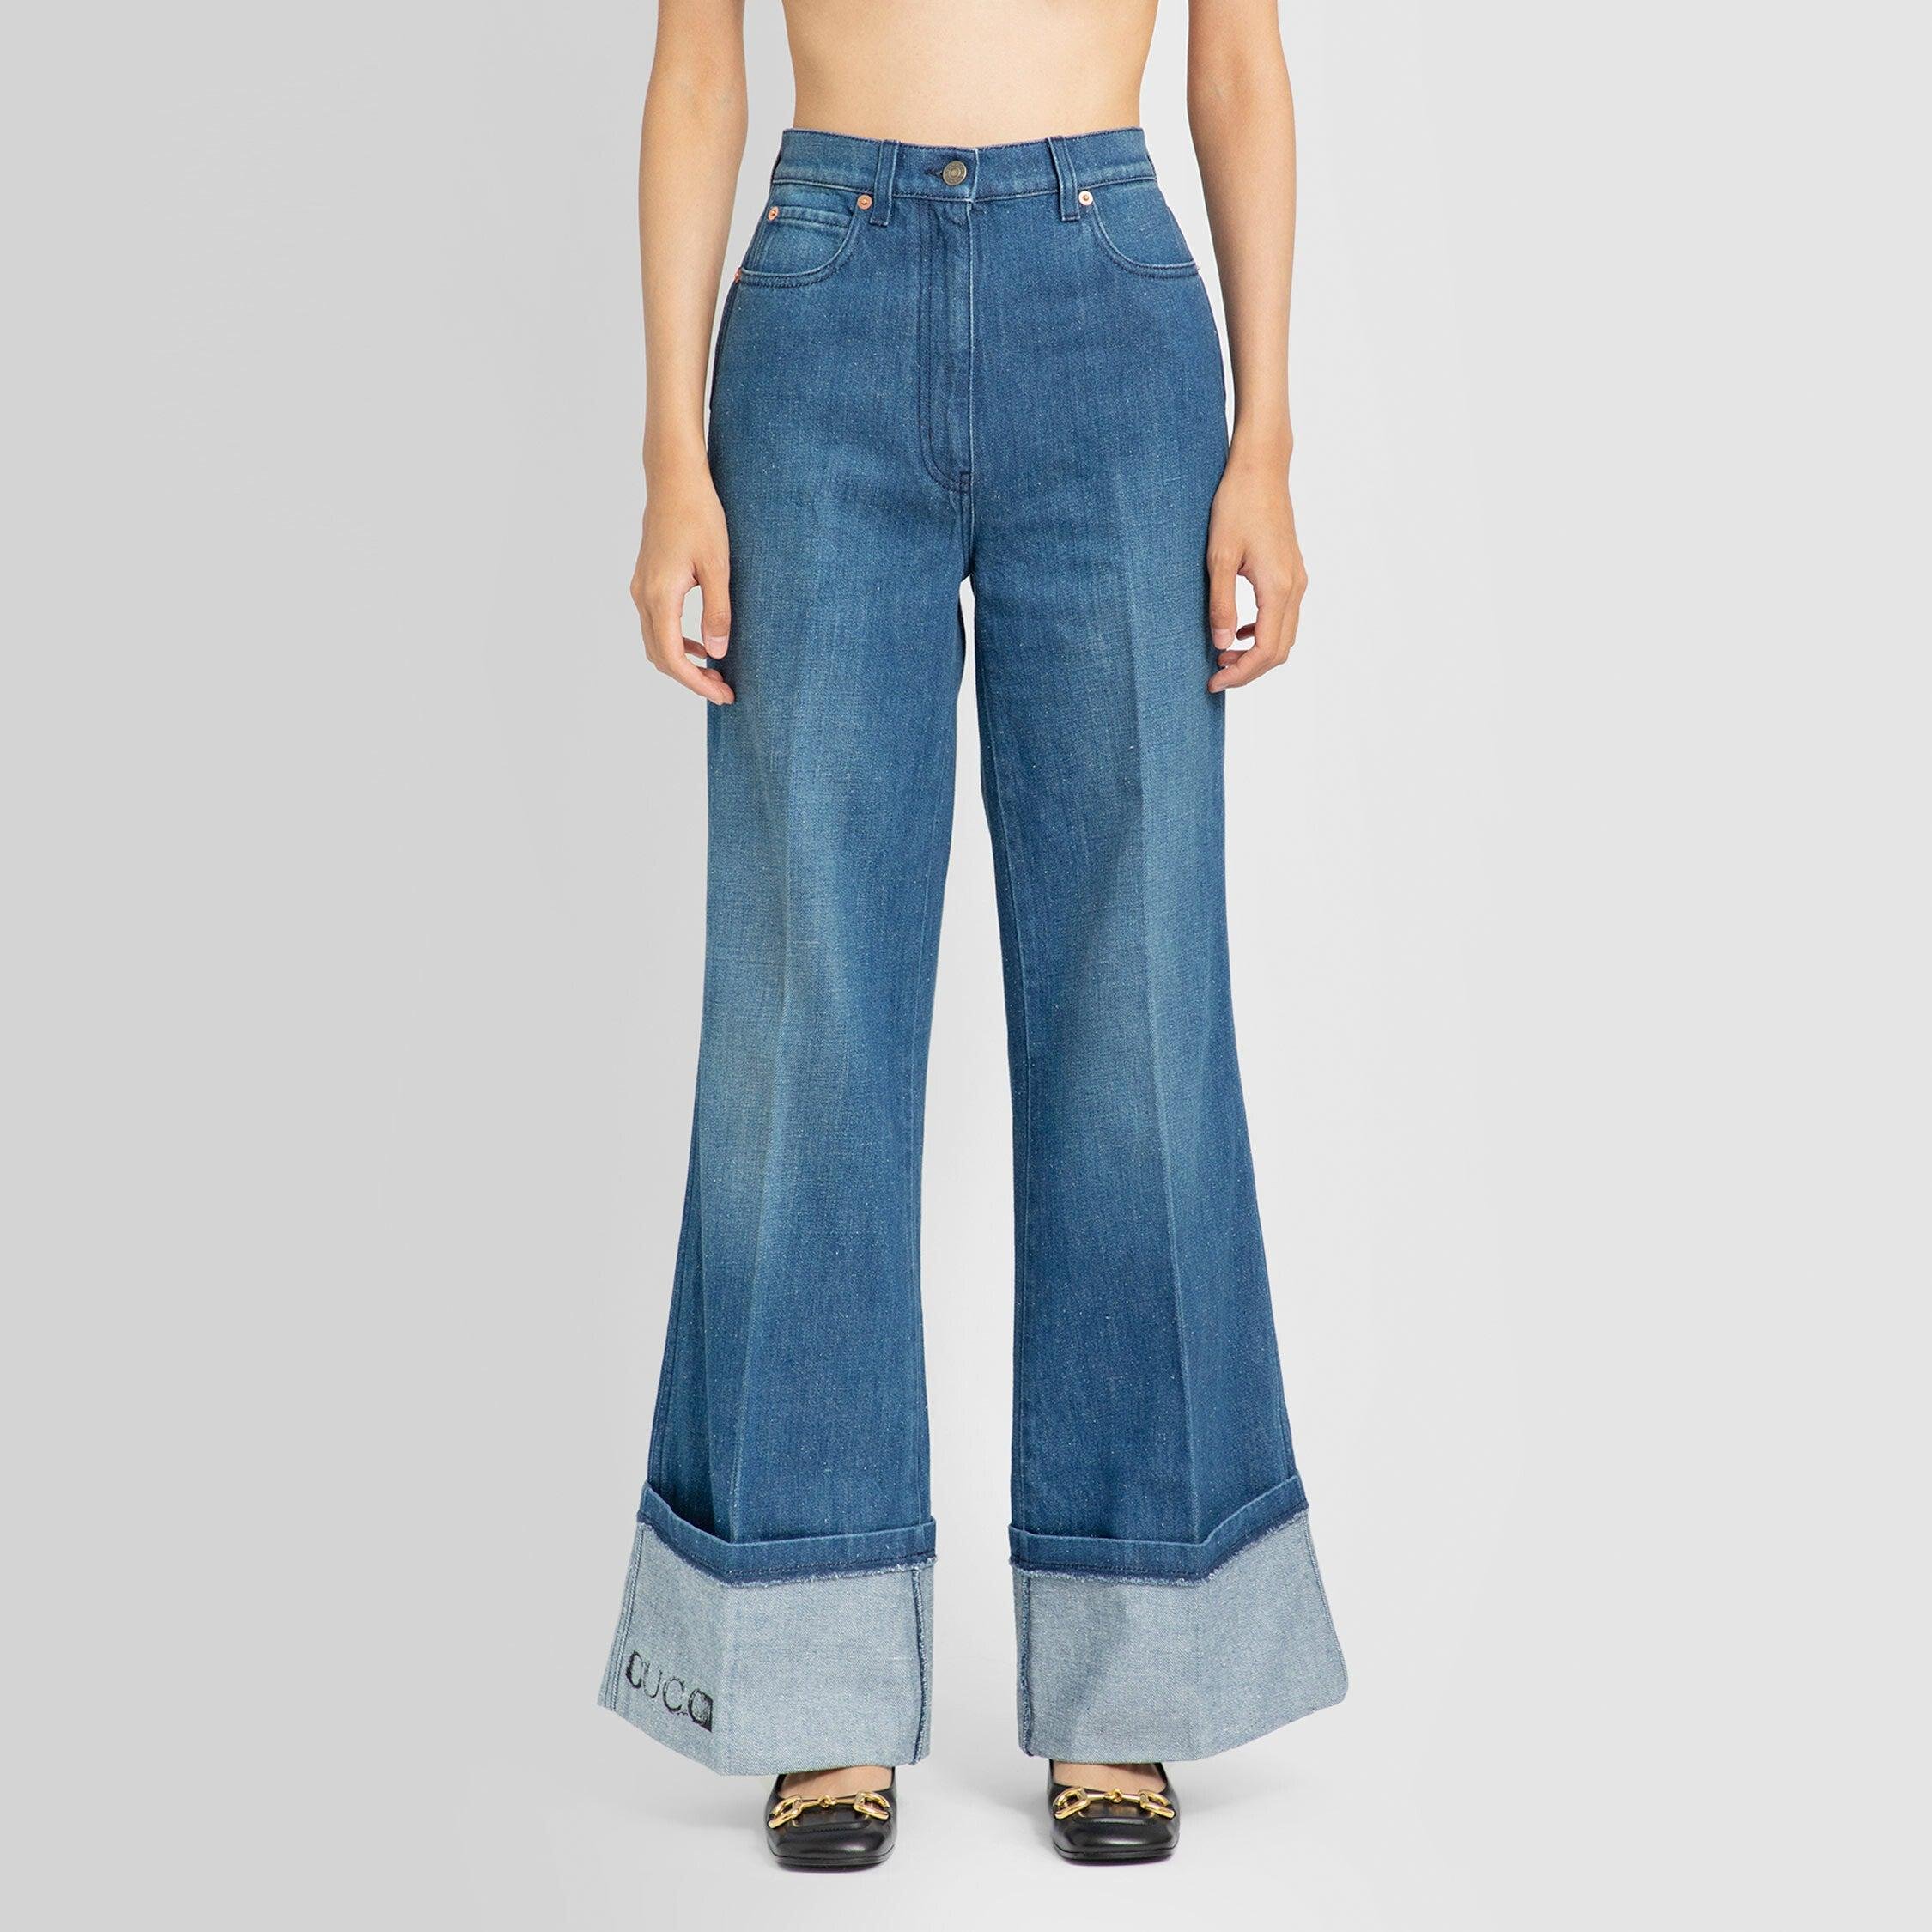 GUCCI WOMAN BLUE JEANS by GUCCI